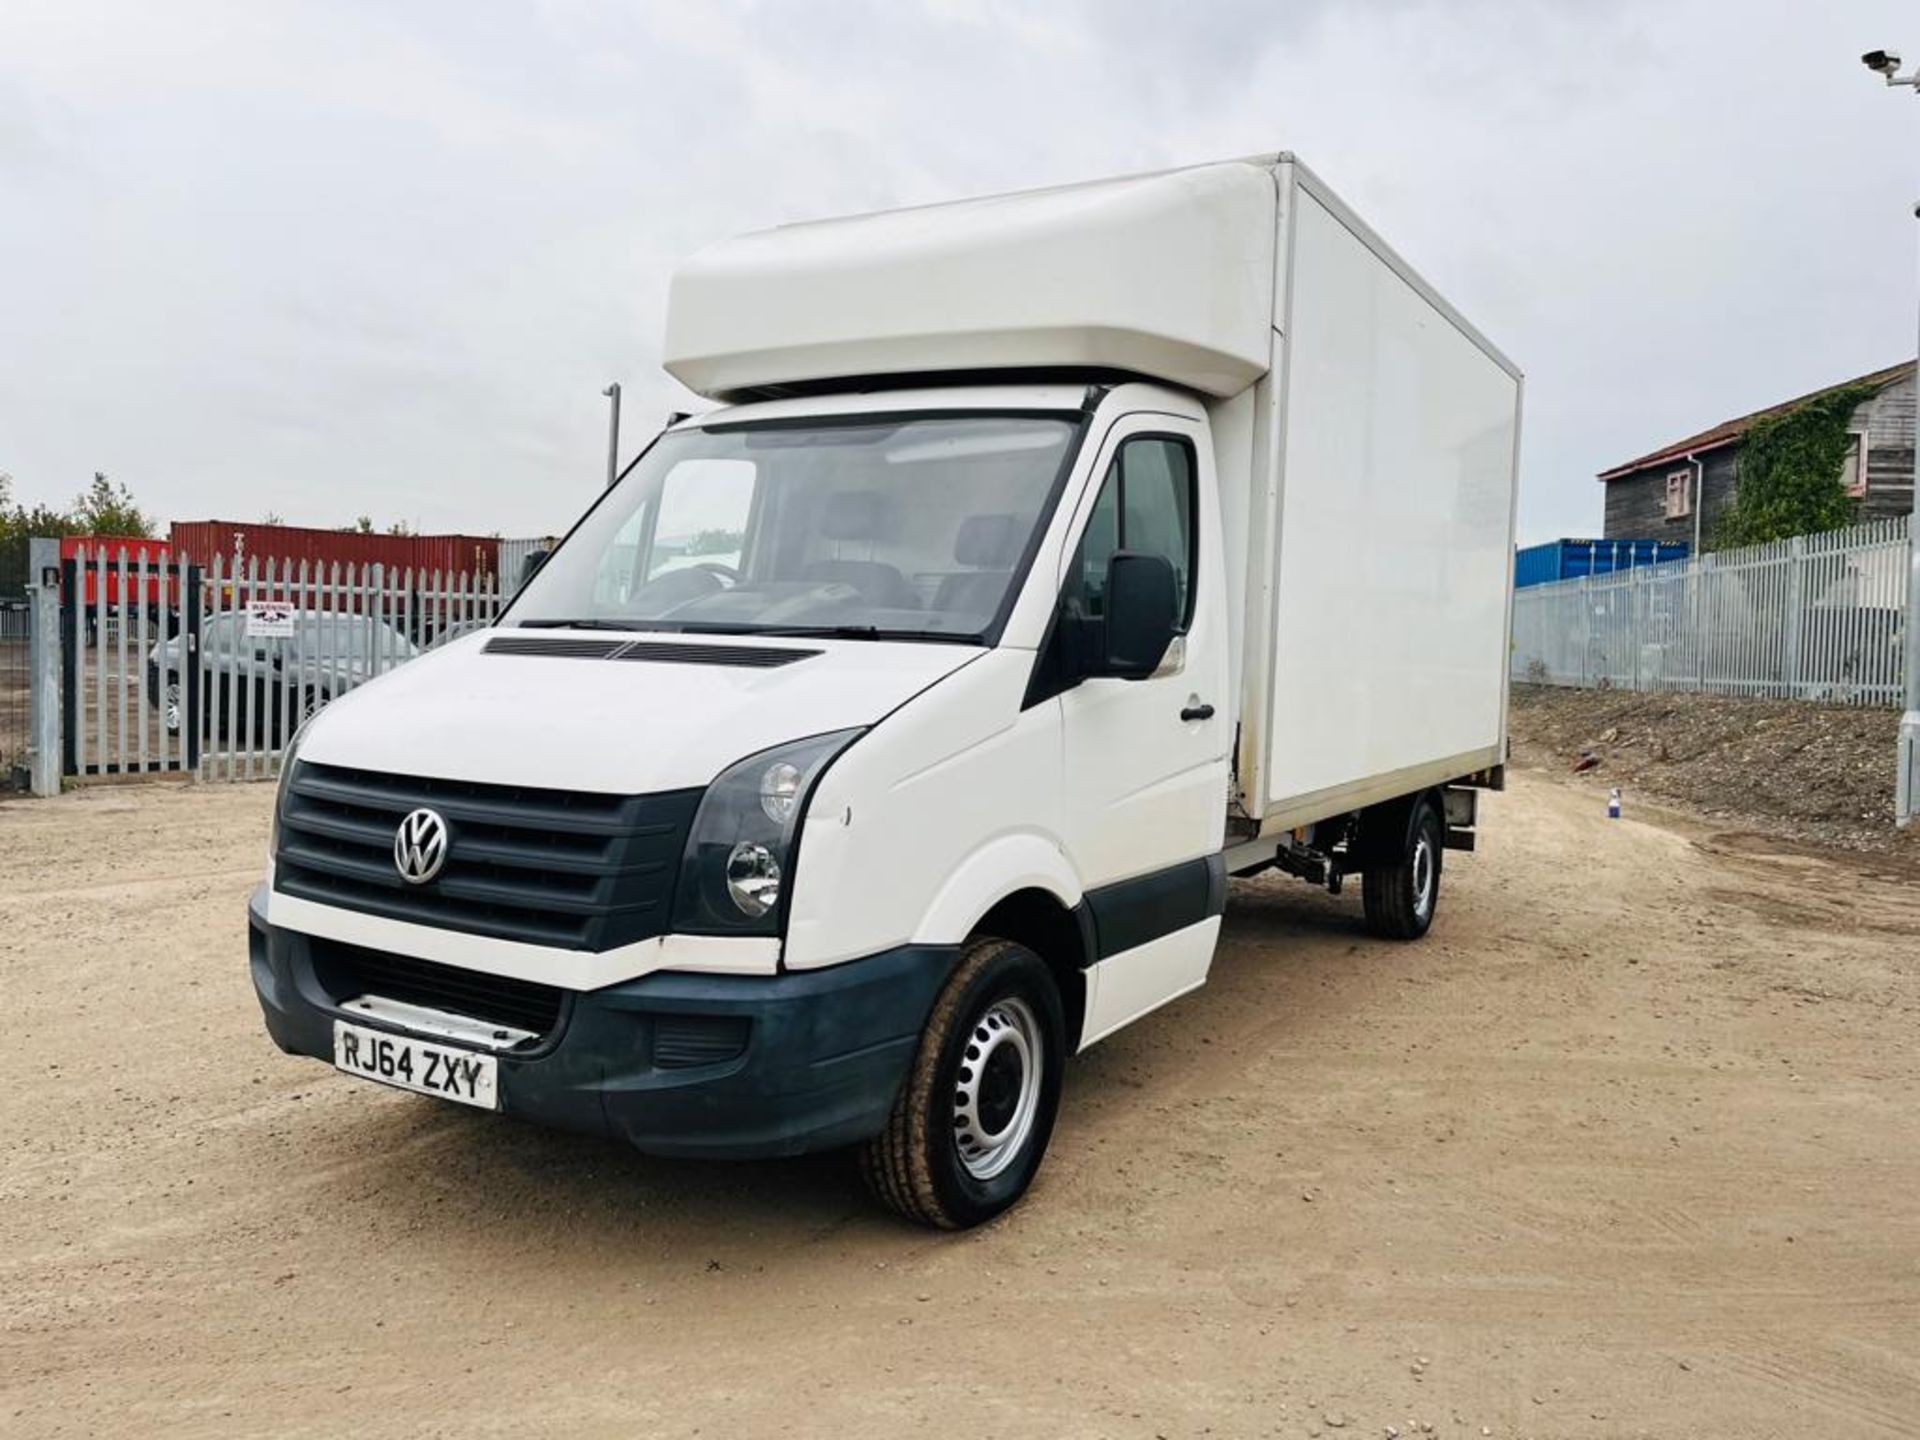 ** ON SALE ** Volkswagen Crafter 35 2.0 TDI 136 LWB 2015 (64 Reg) - Luton Body - Tail Lift - Image 3 of 26